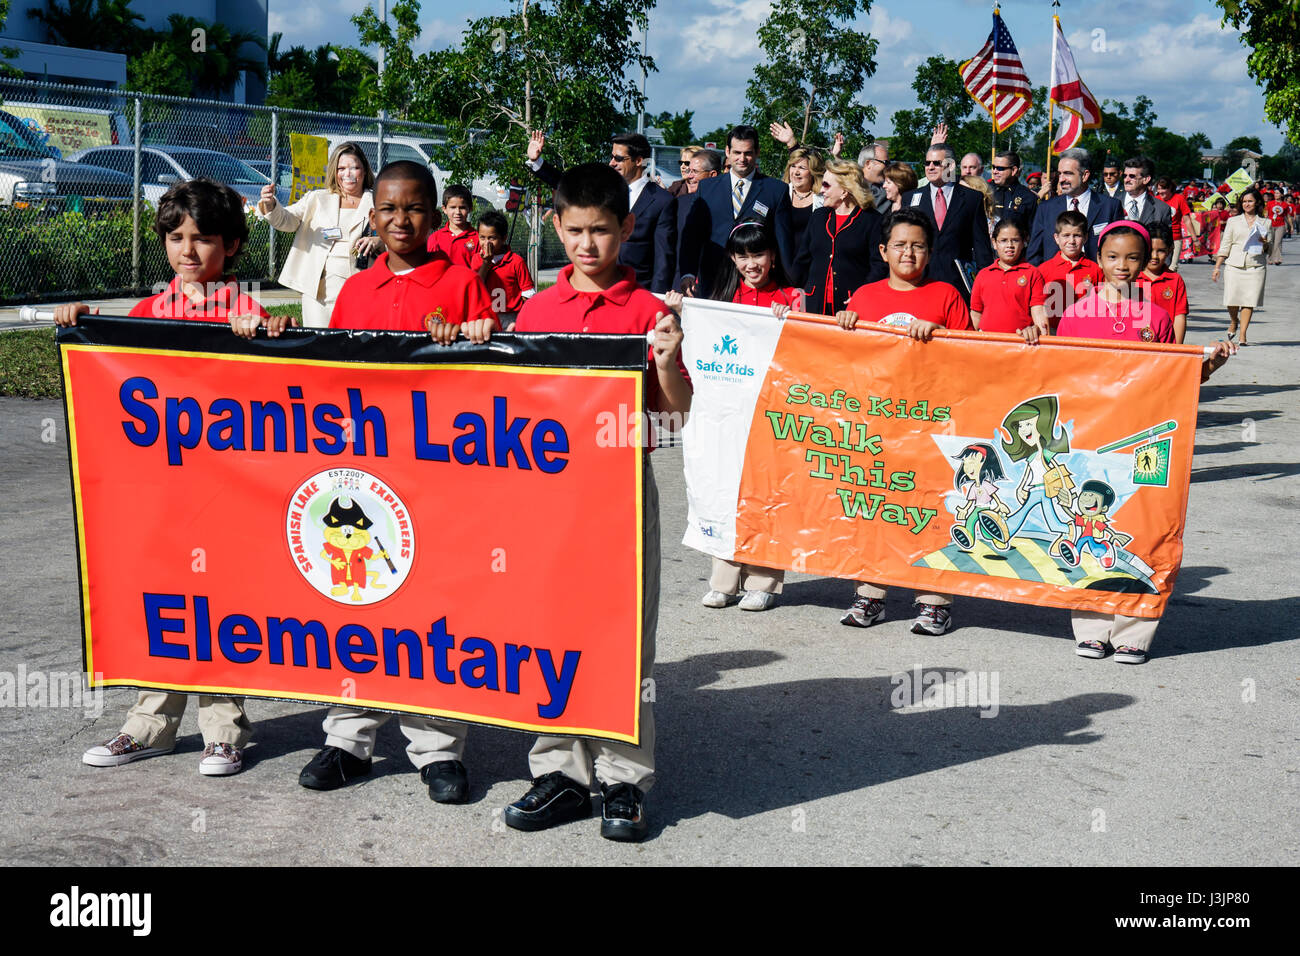 Miami Florida,Spanish Lake Elementary School,International Walk to School Day,student students pupil safety poster contest,parade,multicultural,Black Stock Photo